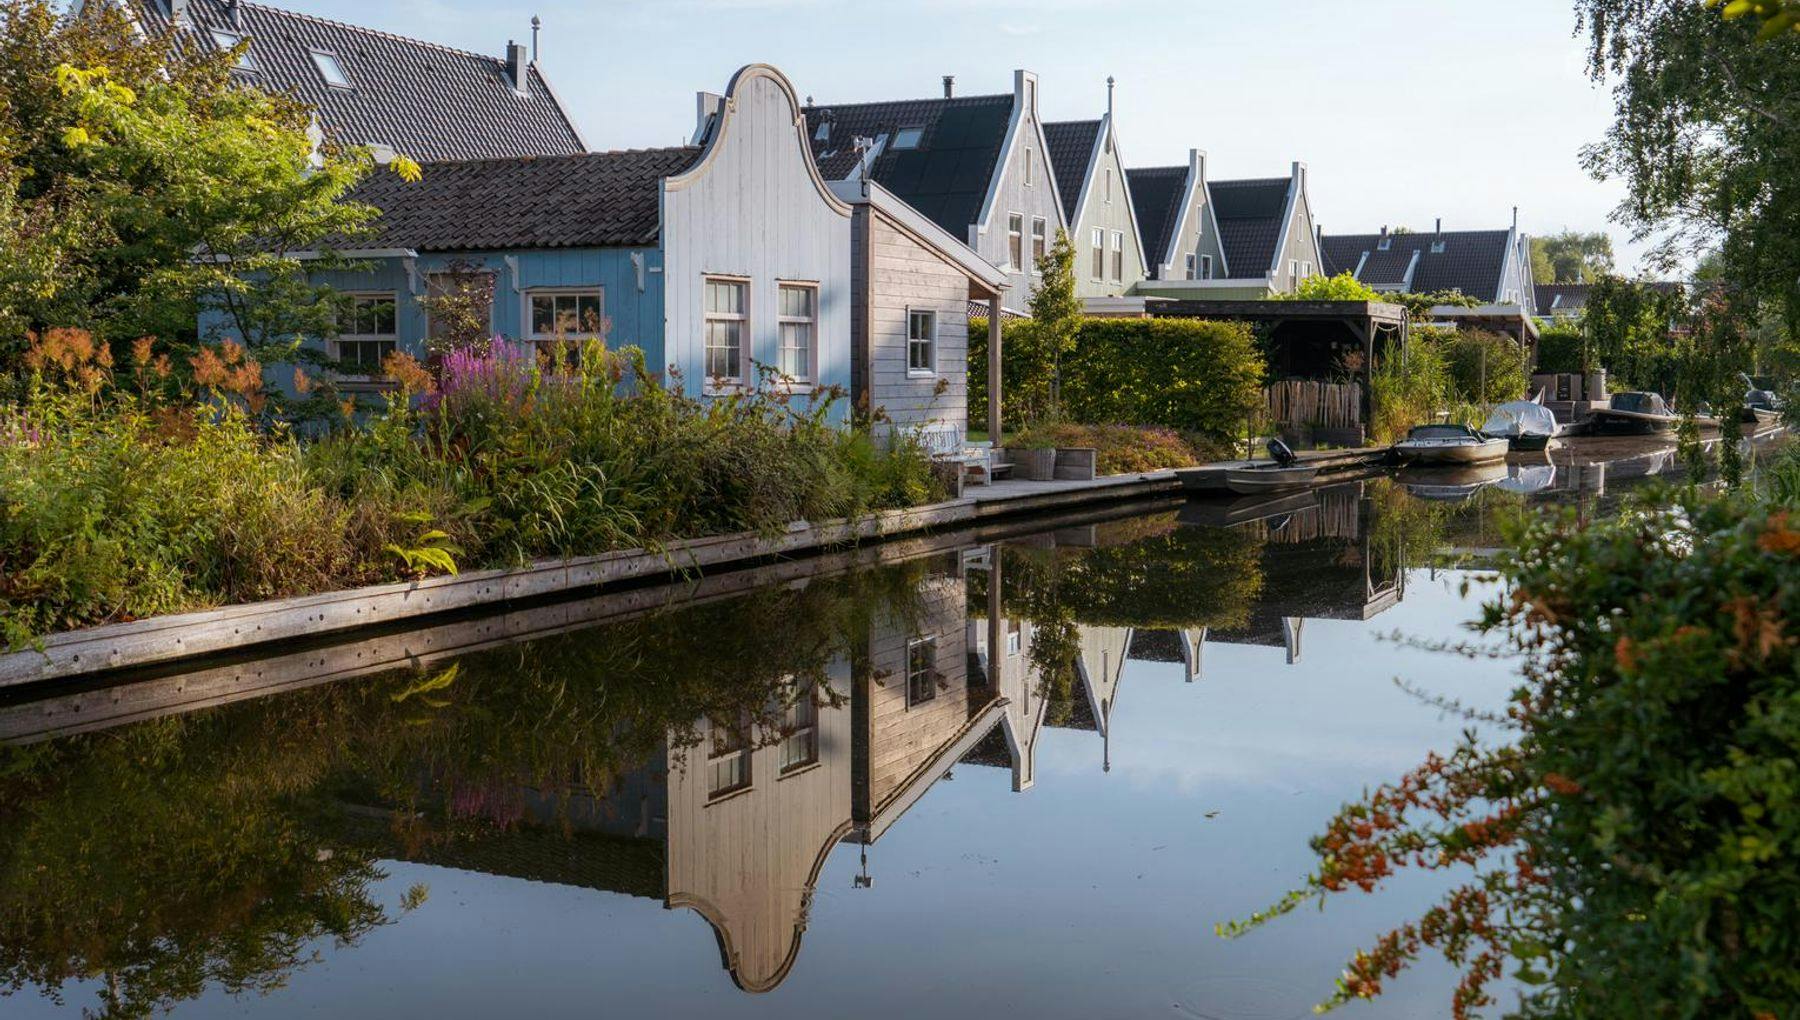 Westzaan is a so-called 'Lintdorp', a village where the houses are built like a ribbon along the water).